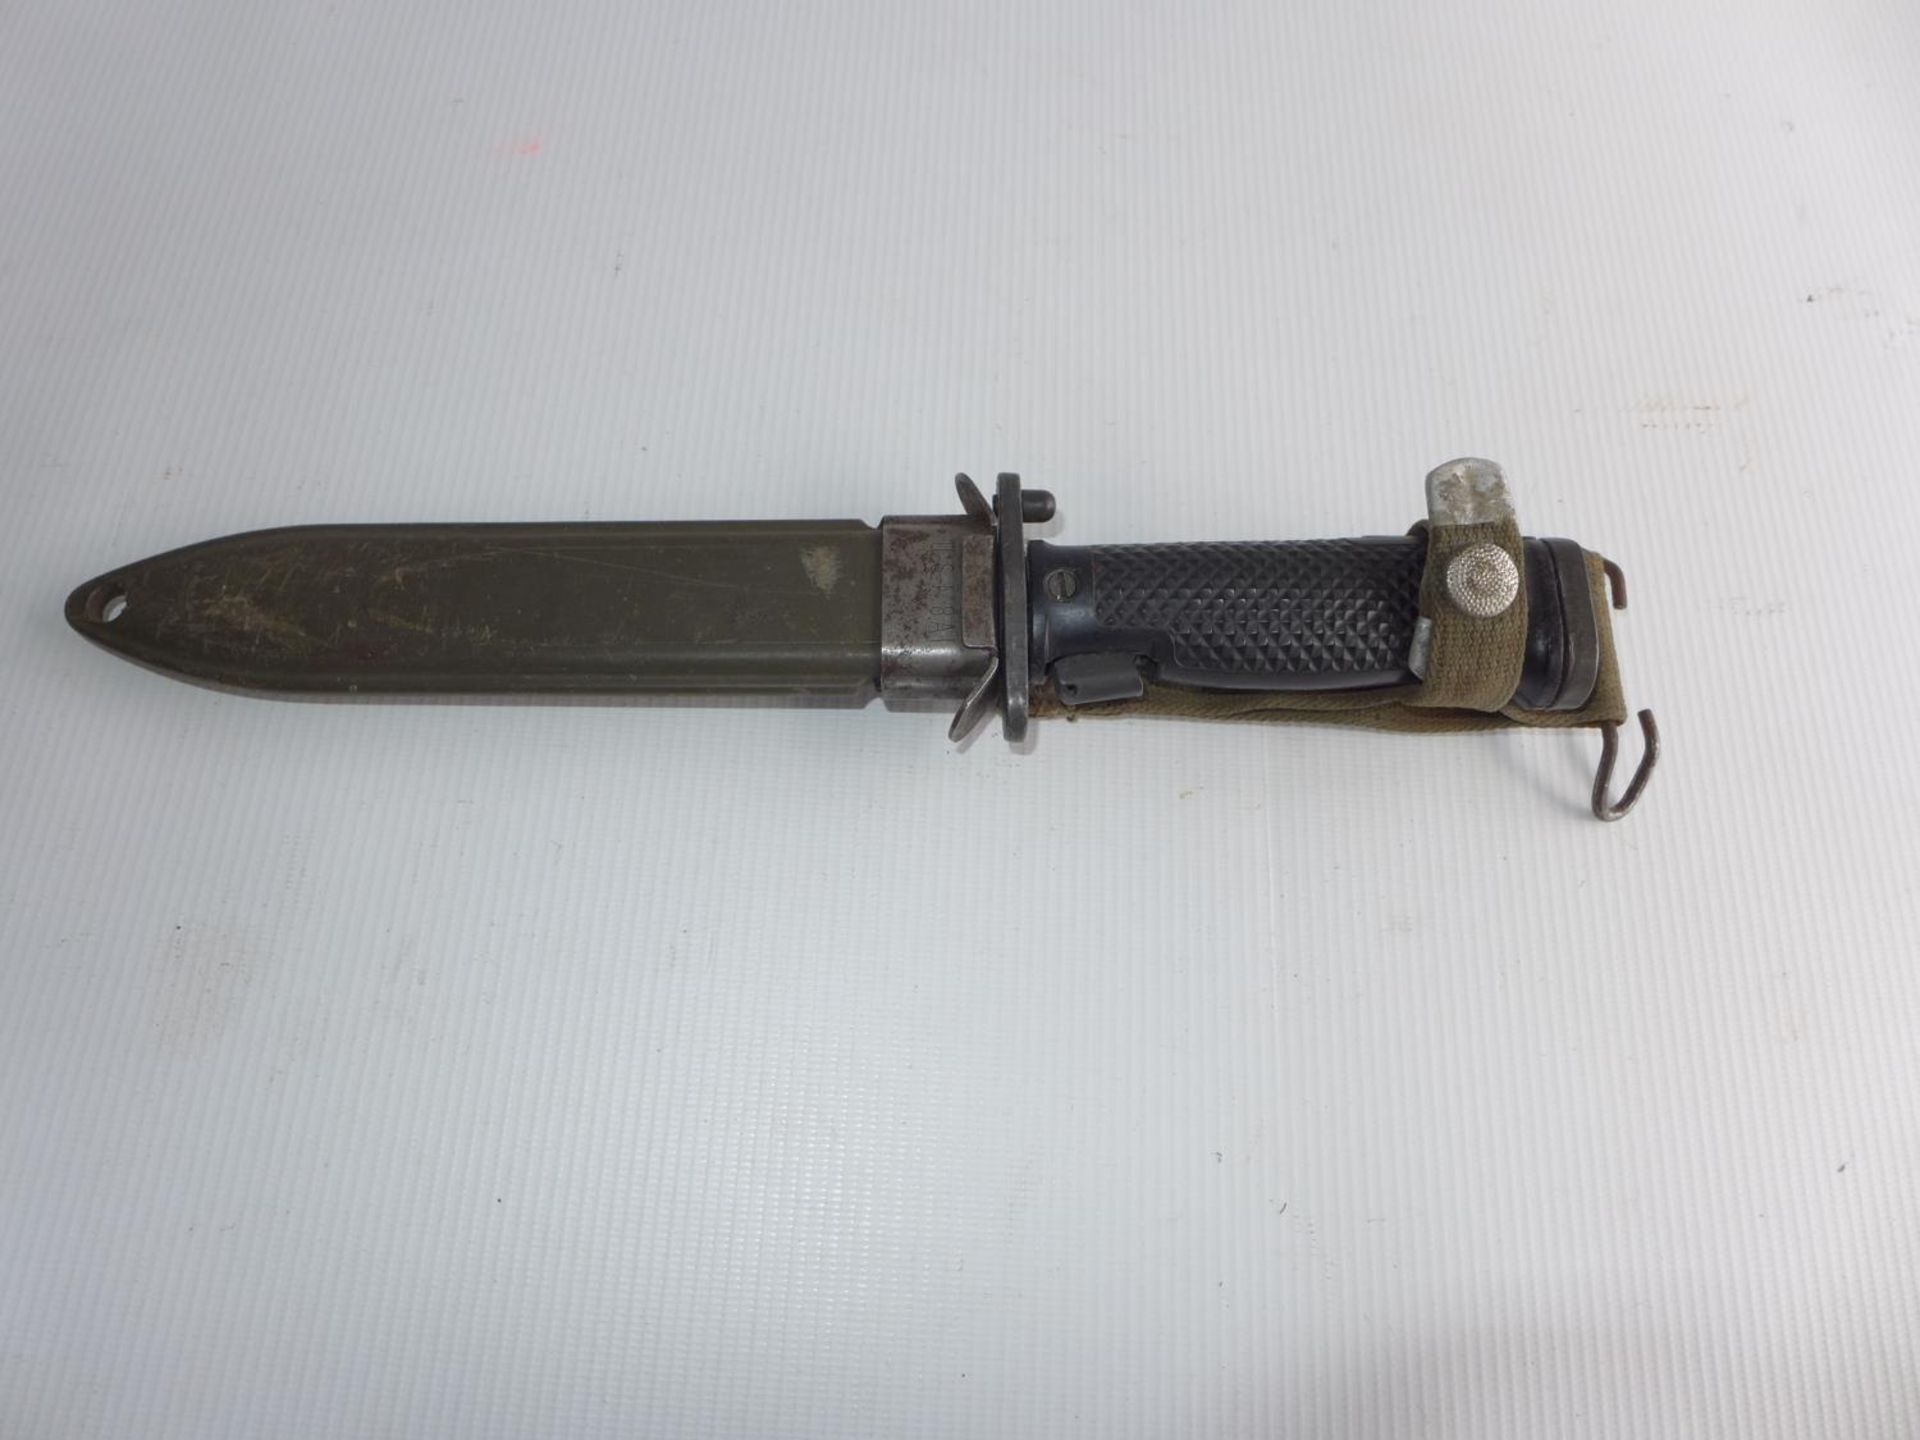 A USA M8 A1 BAYONET AND SCABBARD 16.5cm BLADE - Image 4 of 4